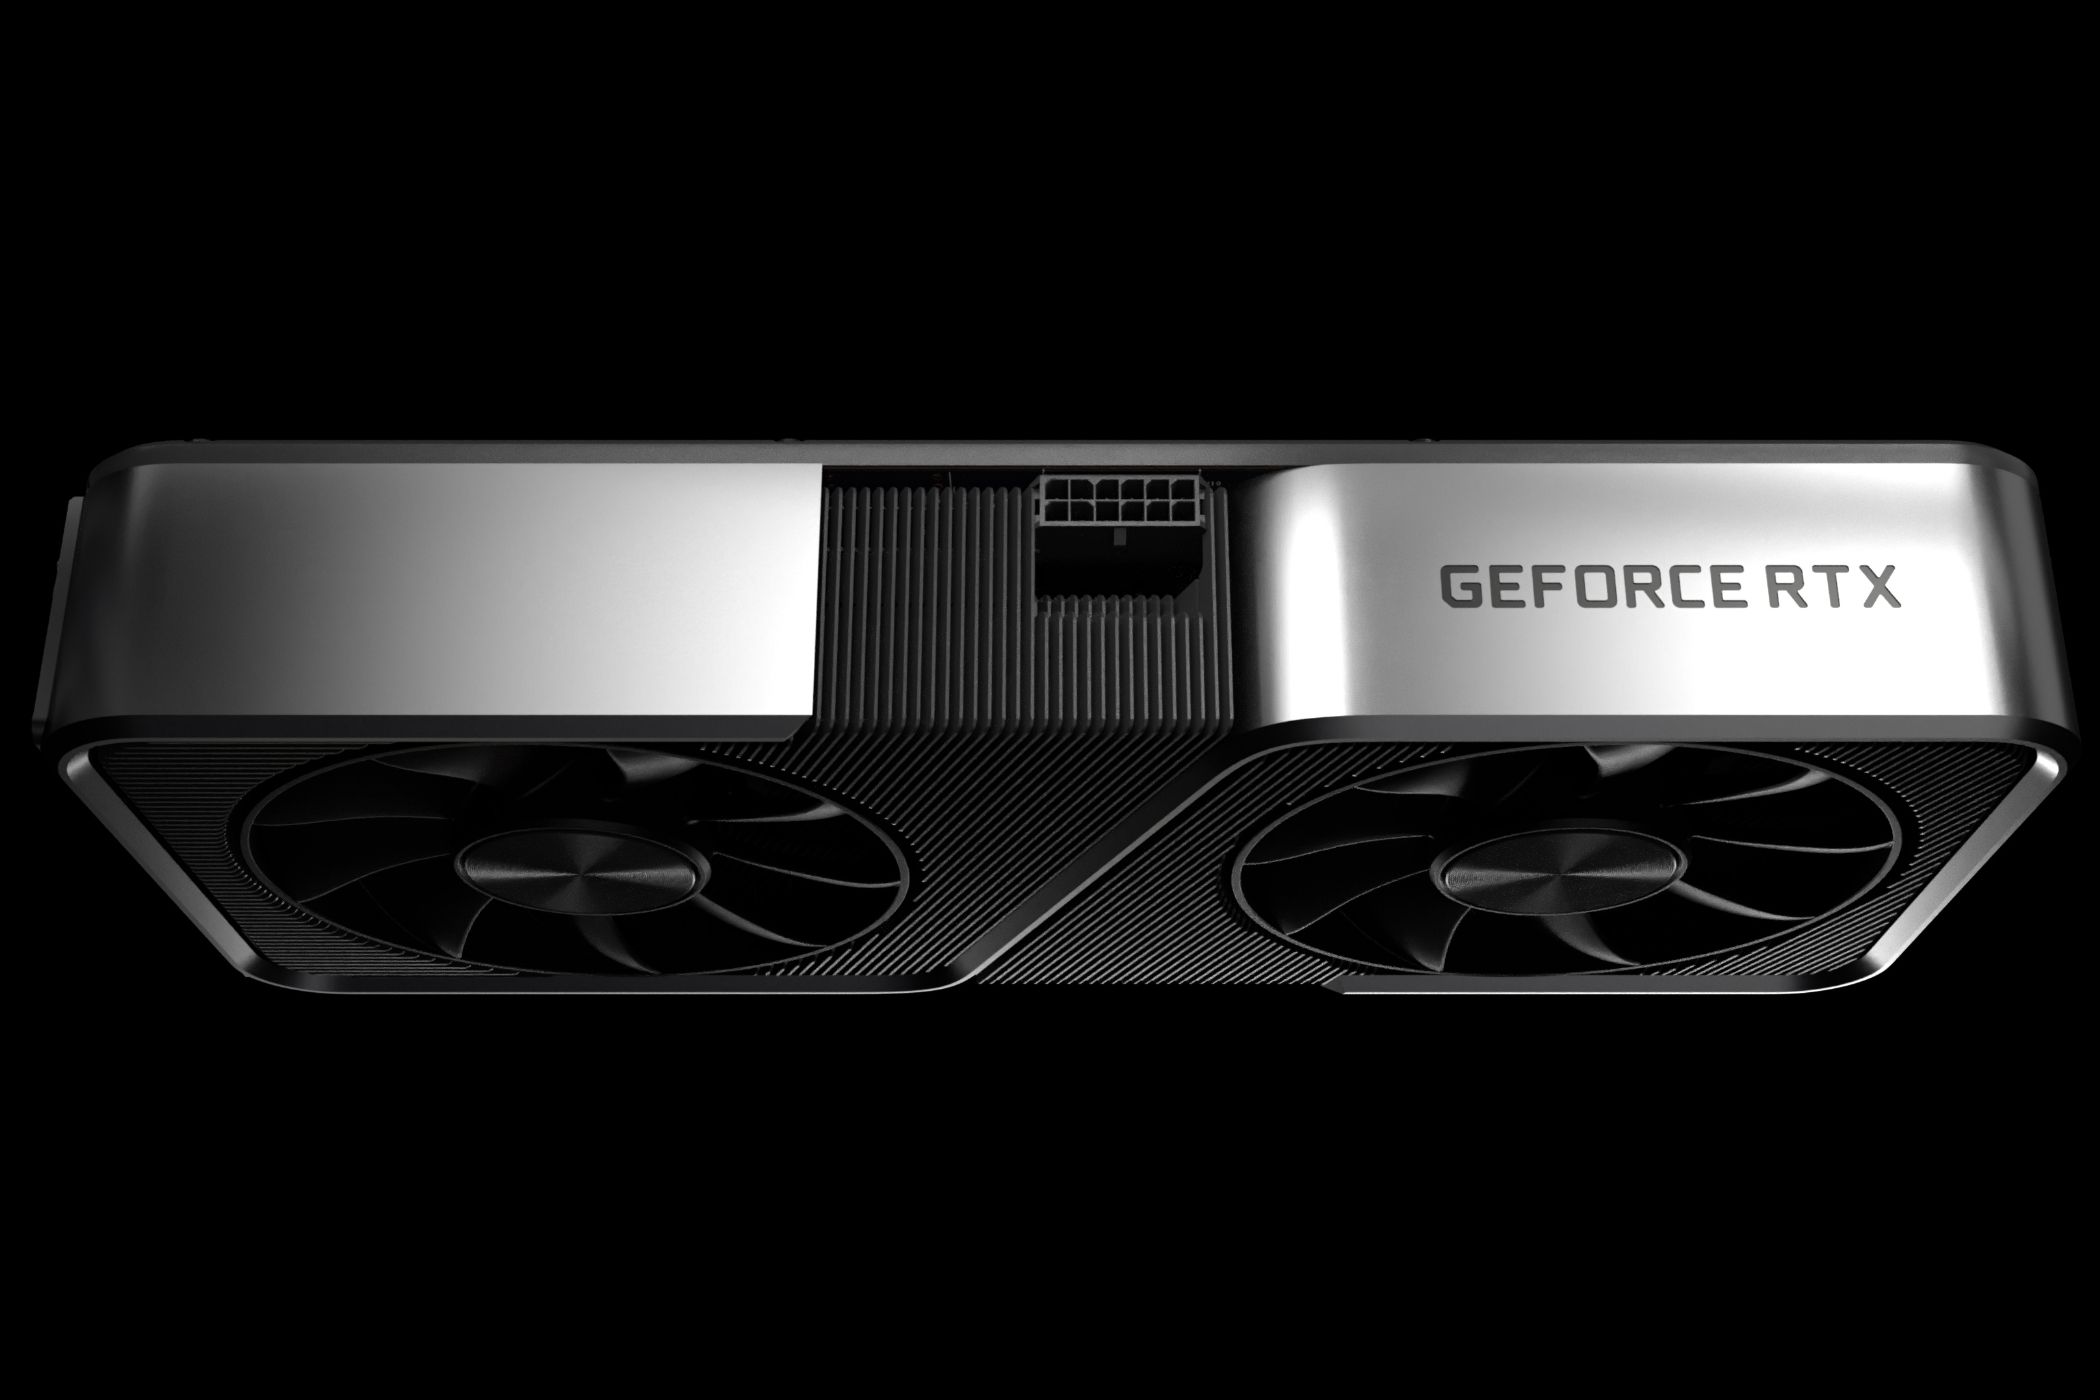 Nvidia gallery image of the RTX 3070 Founder's Edition with black background.